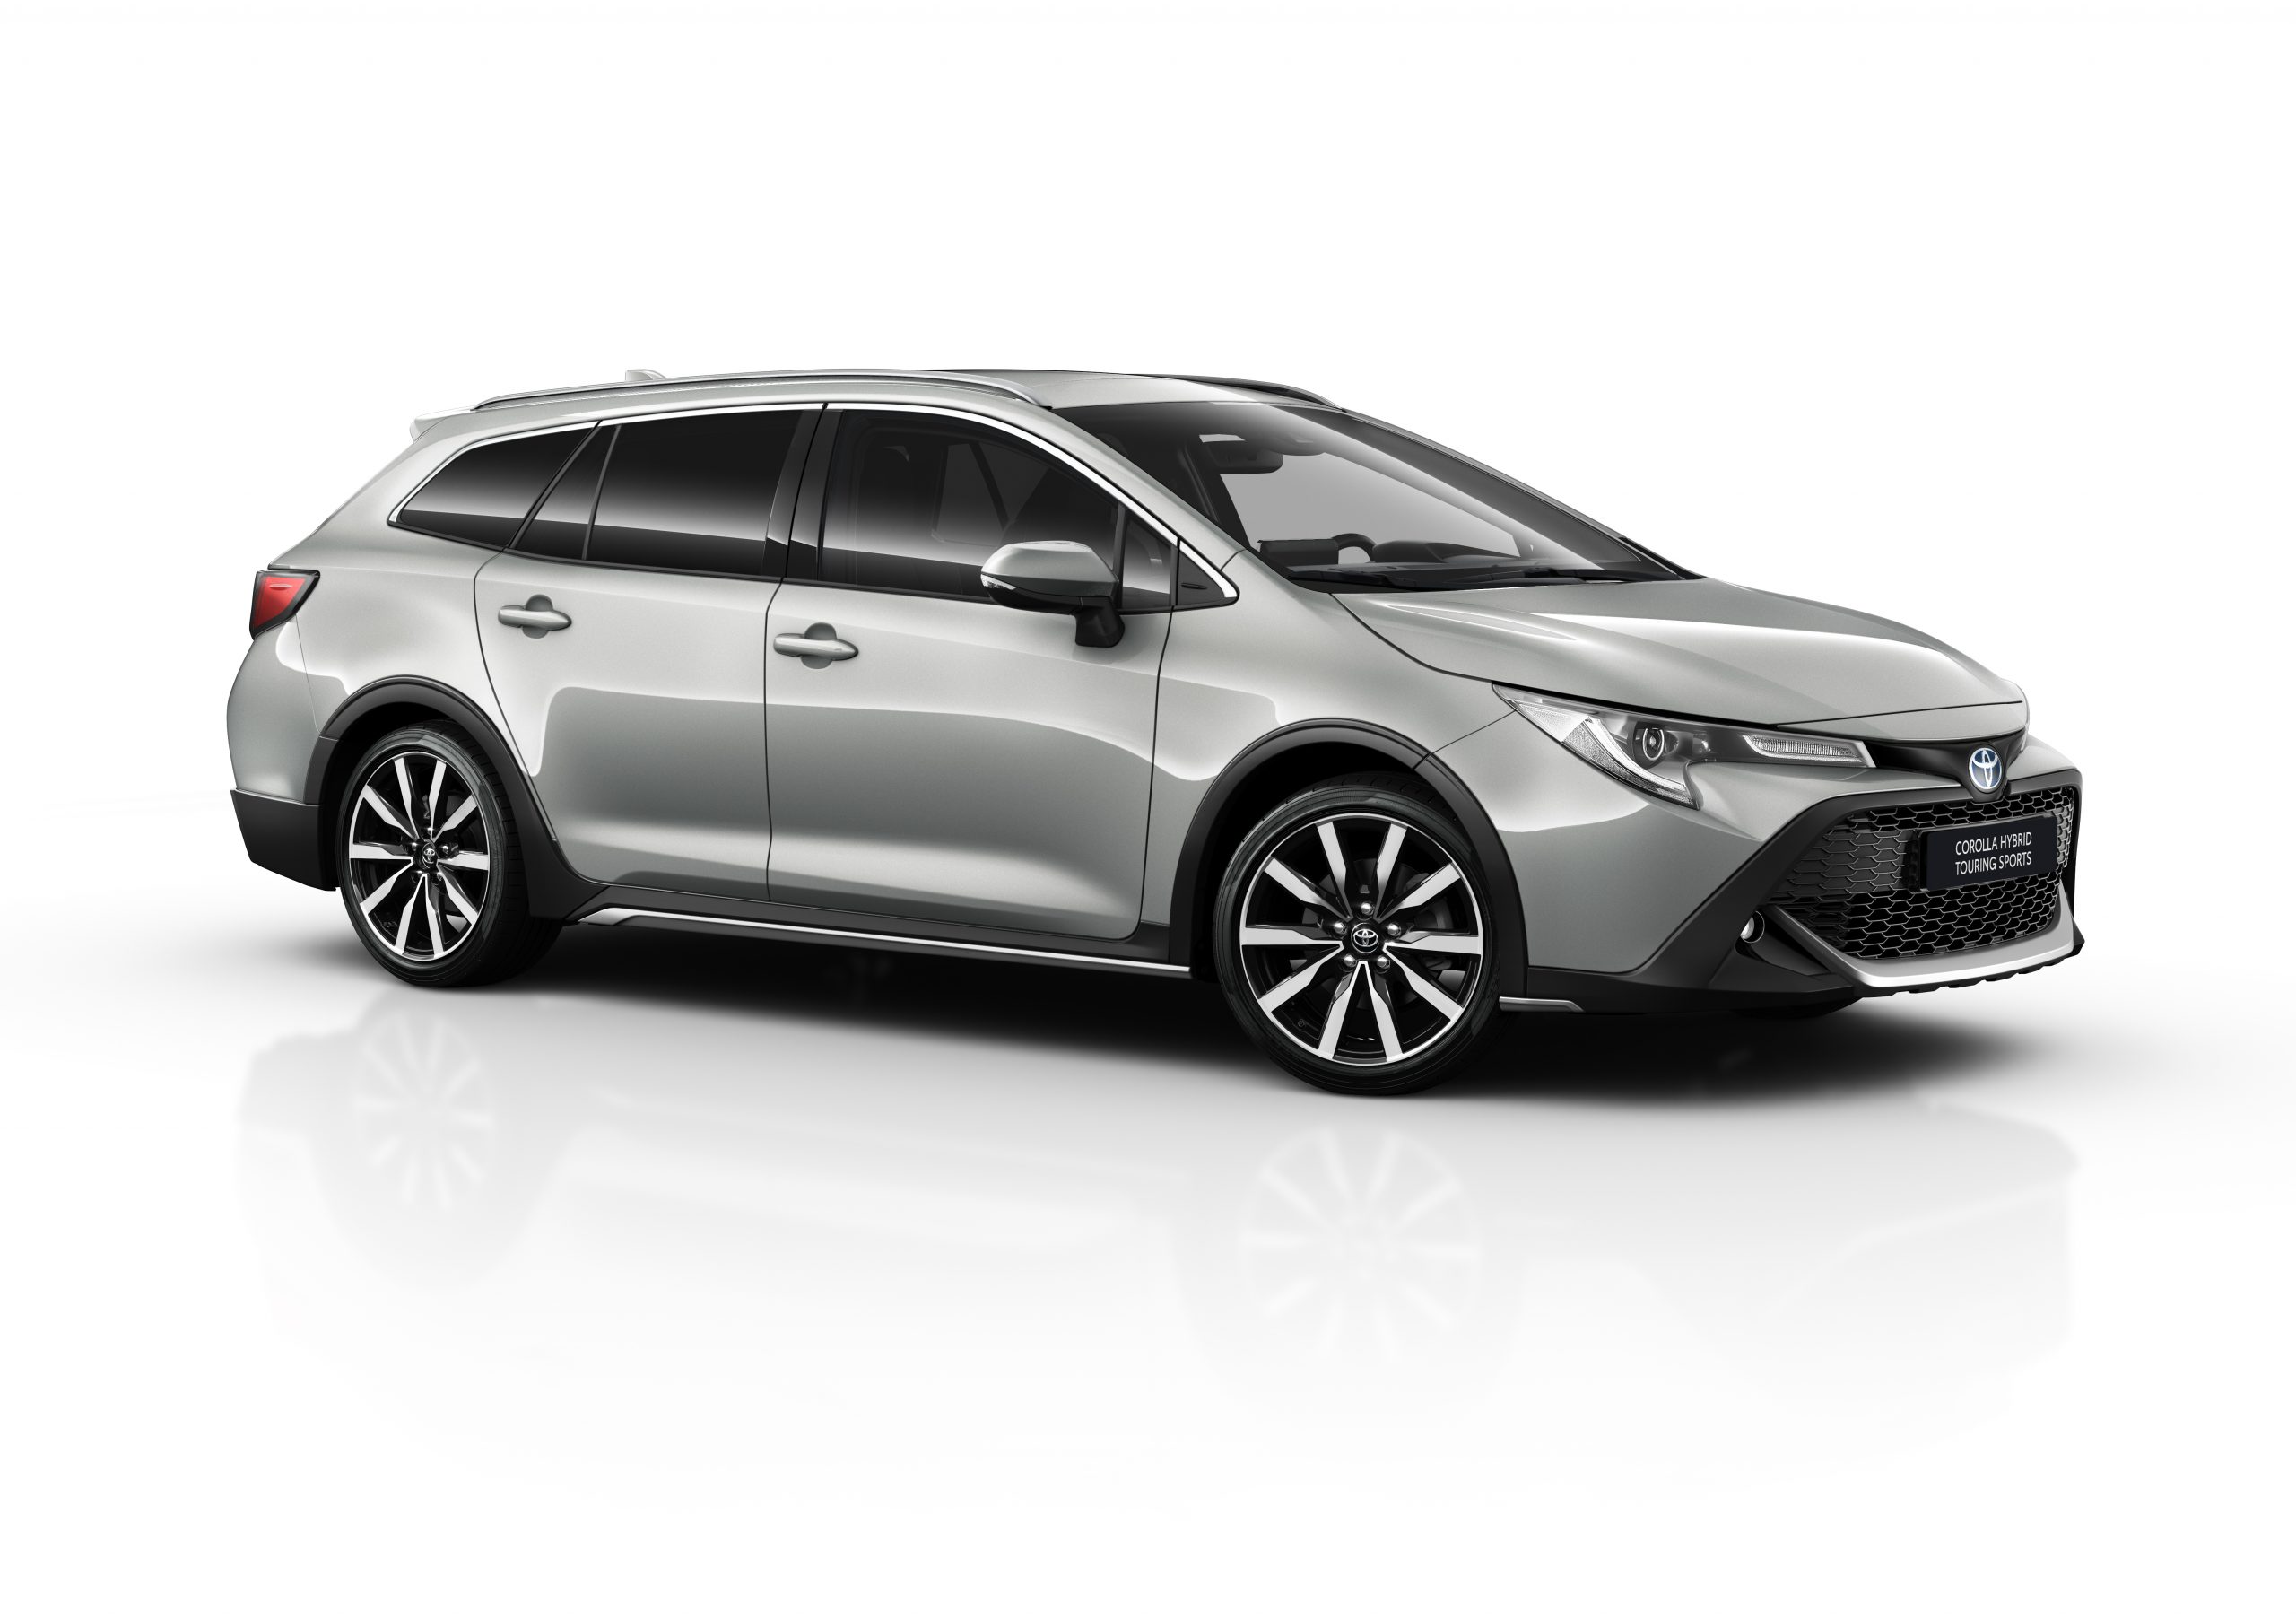 2022 Toyota Corolla Hybrid Touring Sports - Wallpapers and HD Images